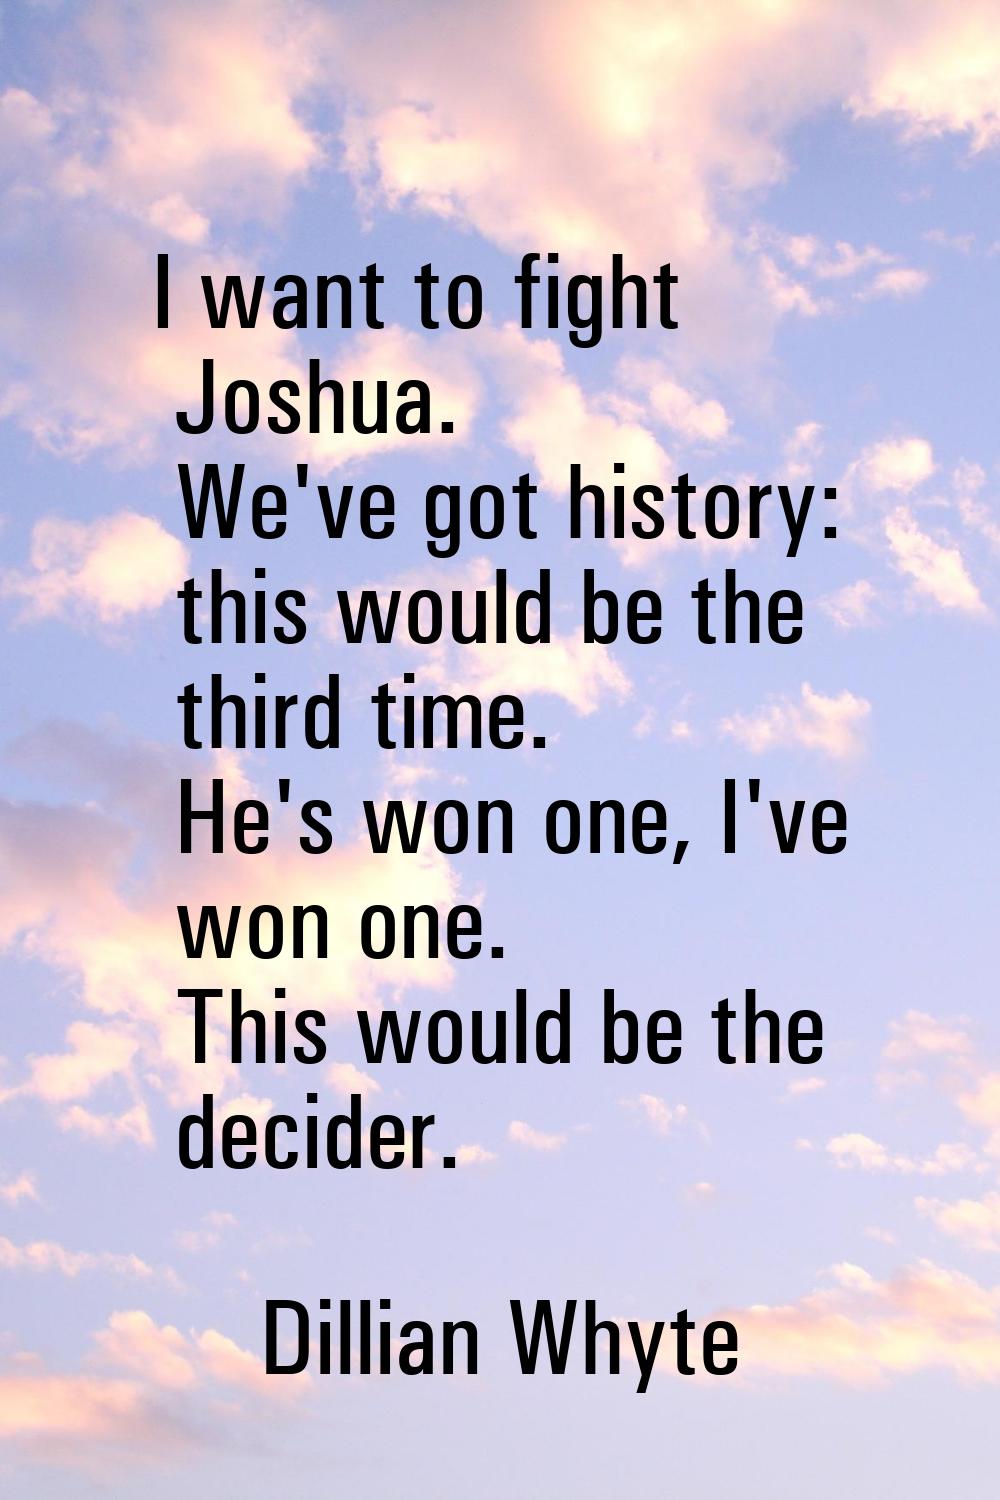 I want to fight Joshua. We've got history: this would be the third time. He's won one, I've won one